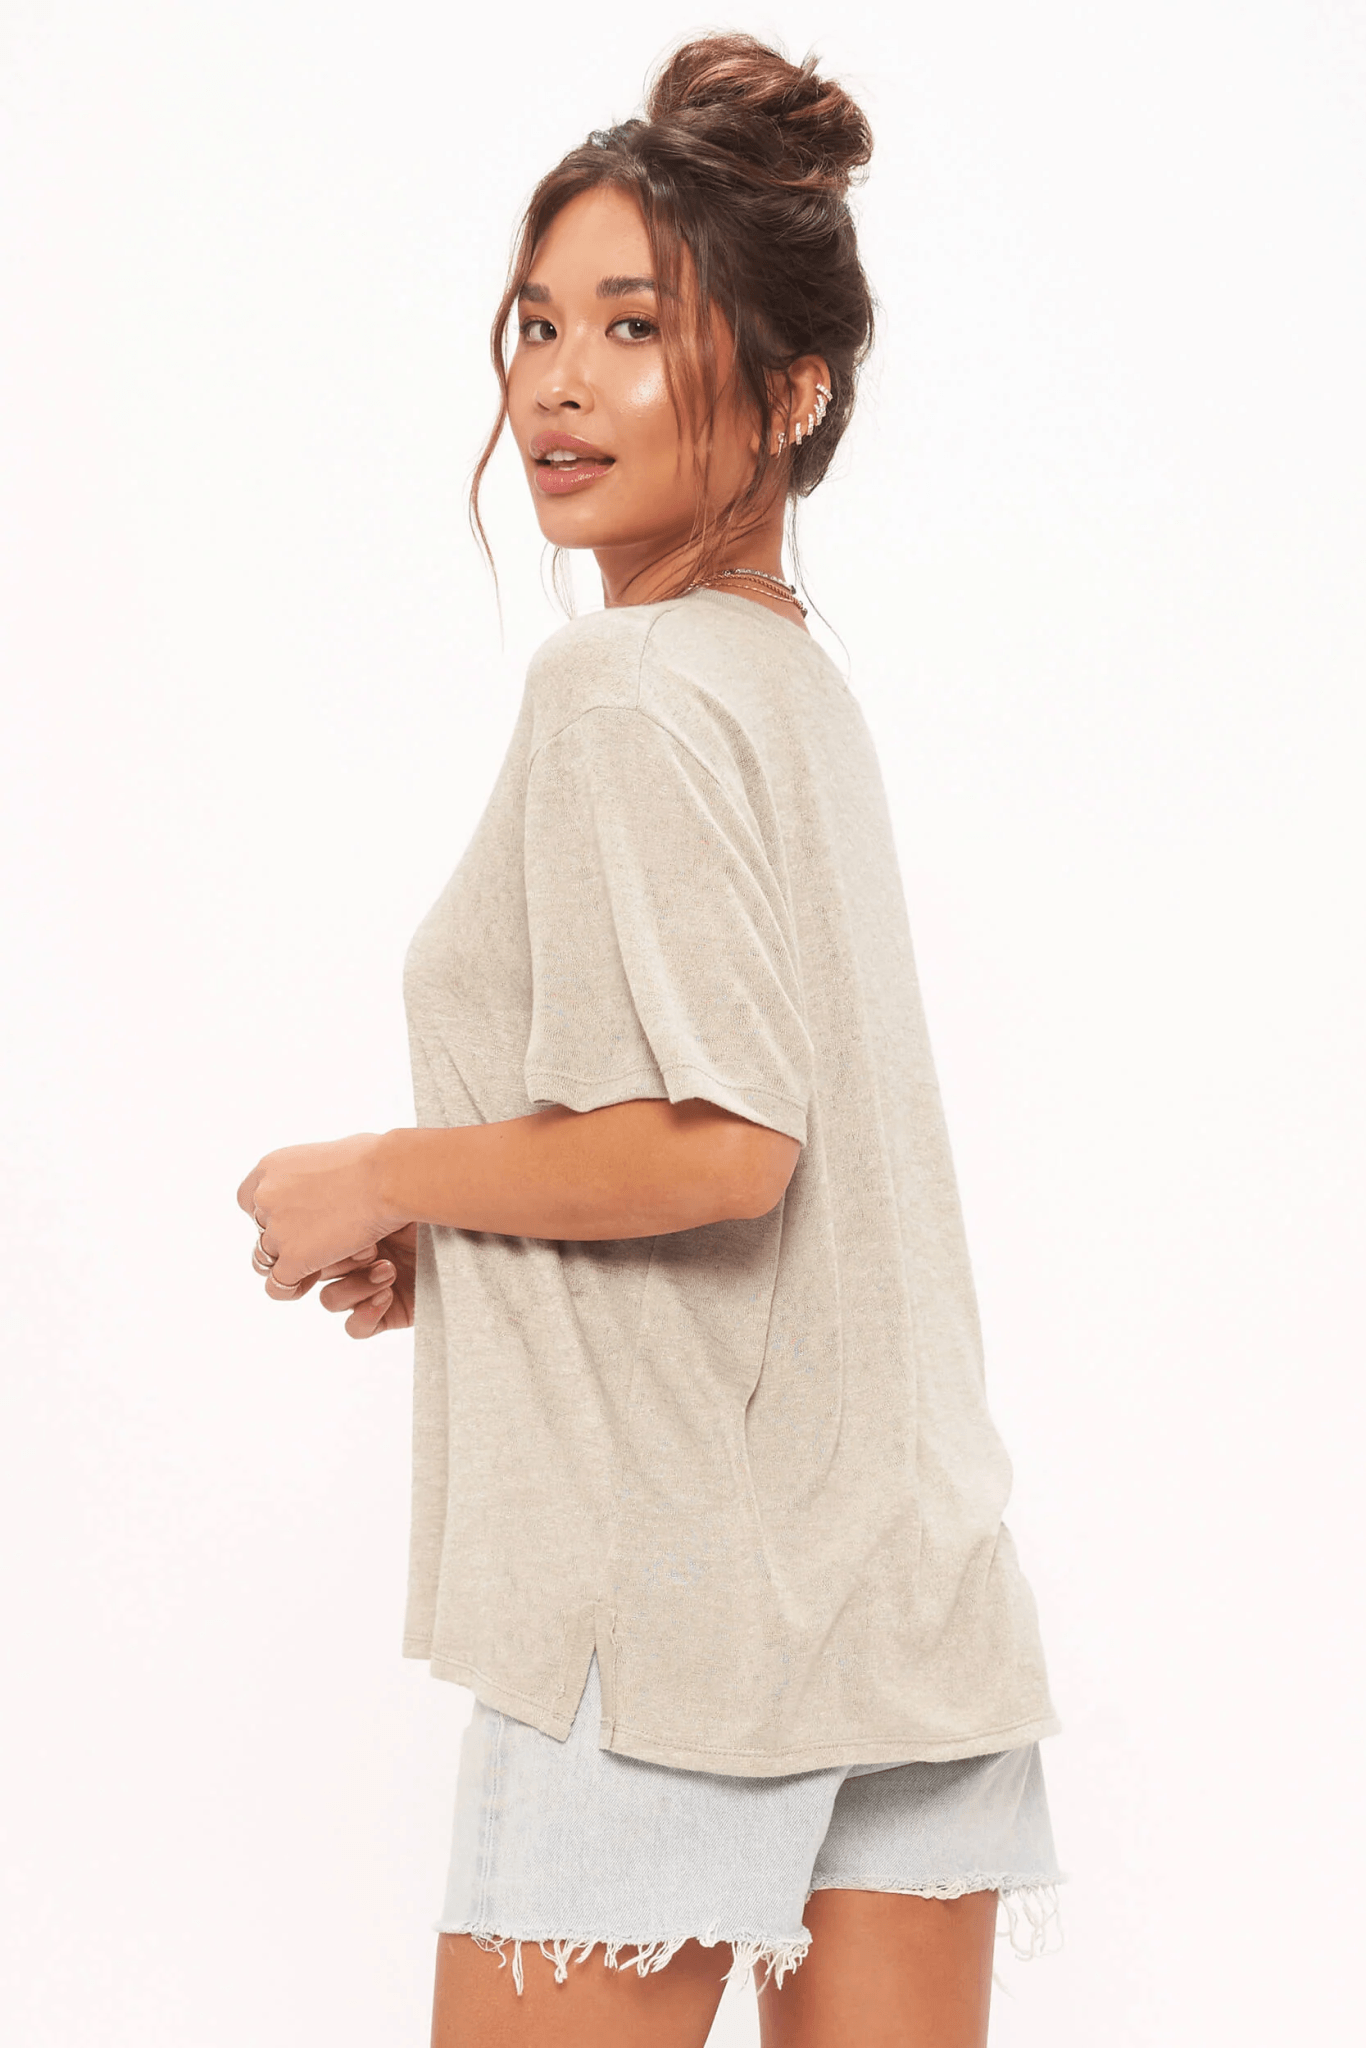 COCO TEXTURED EASY TEE - MOSSY HAZE - Blue Sky Clothing & Lingerie